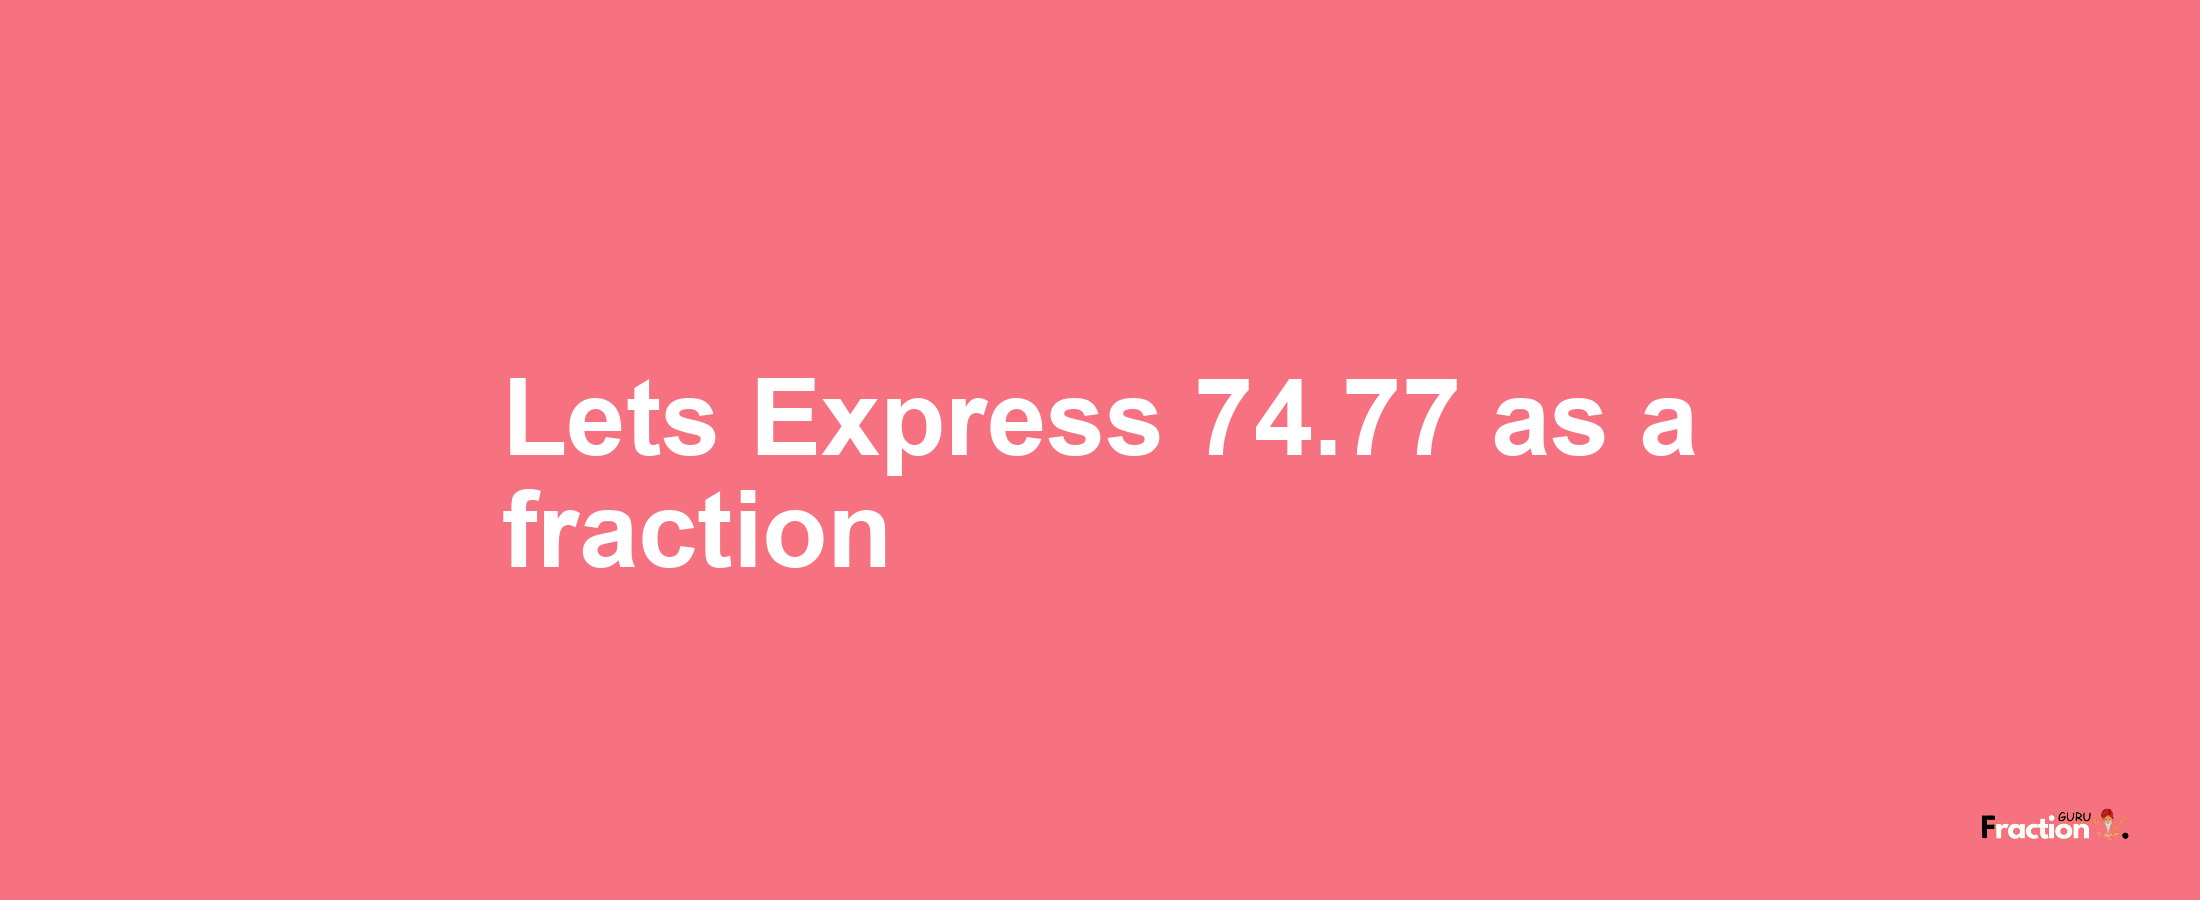 Lets Express 74.77 as afraction